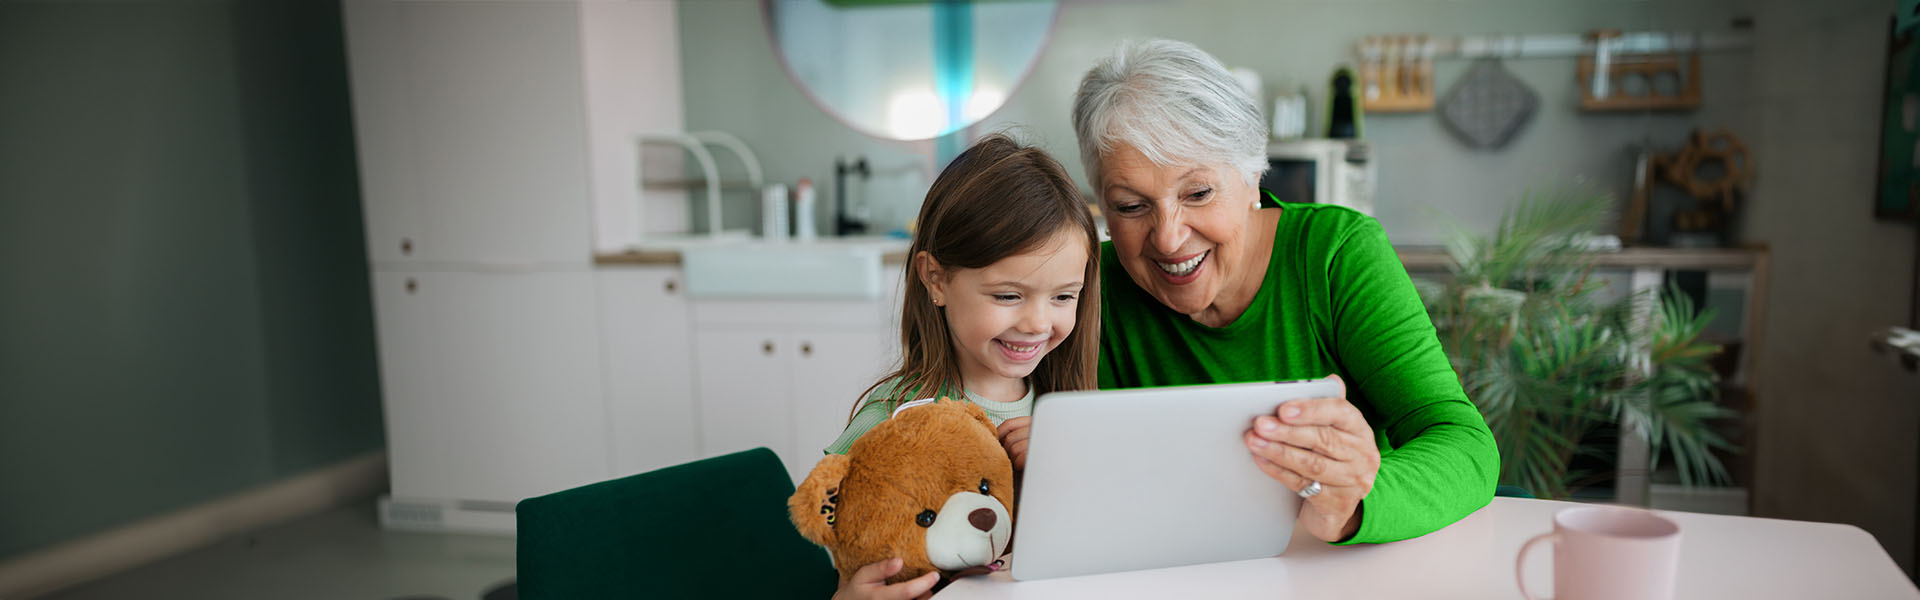 Grandma and granddaughter search for donation site on a tablet connected to Ziply Fiber WiFi 